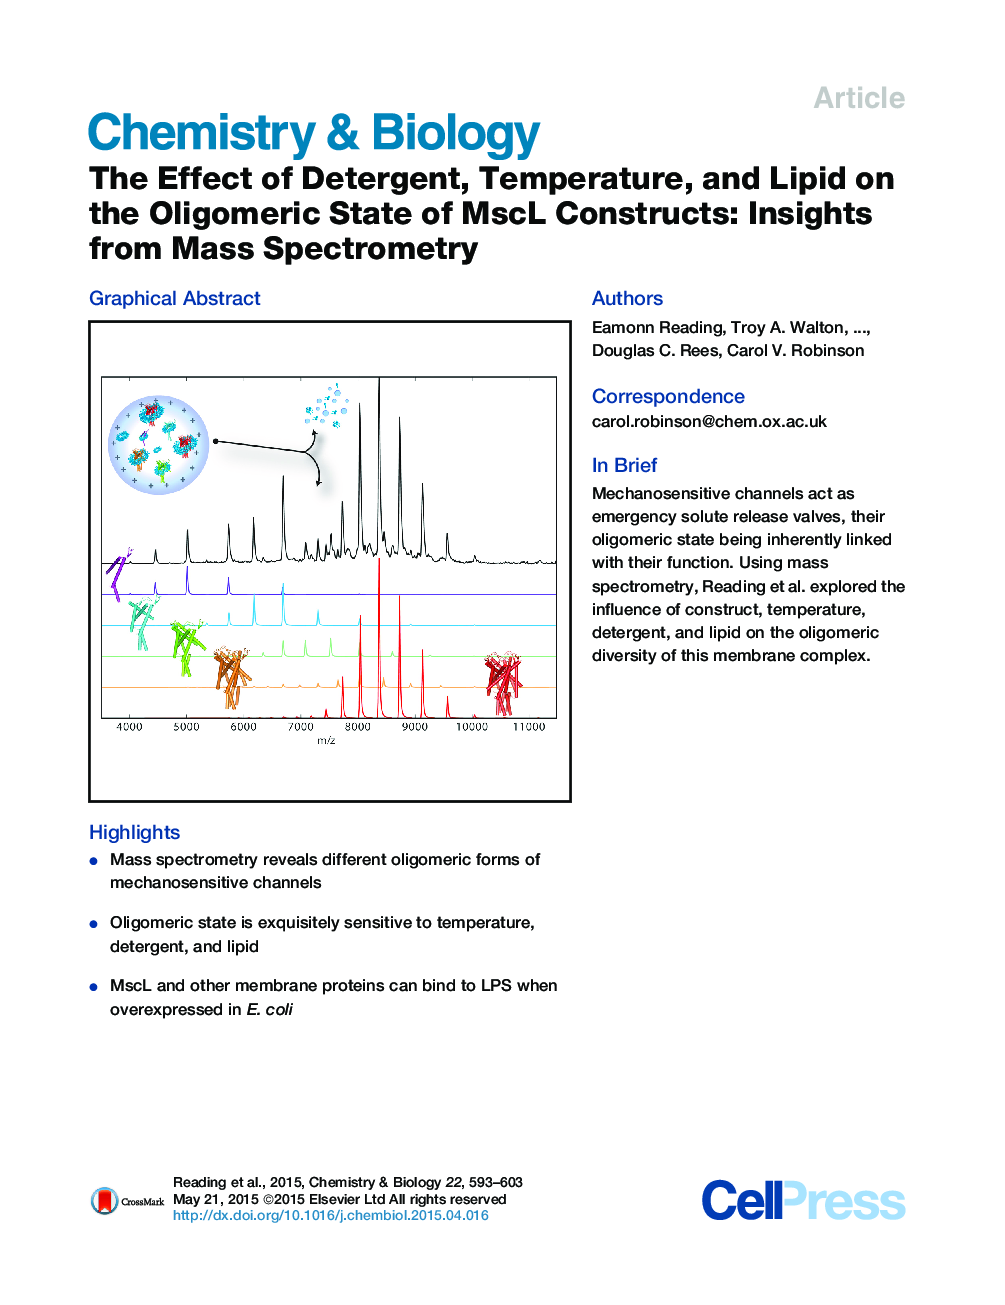 The Effect of Detergent, Temperature, and Lipid on the Oligomeric State of MscL Constructs: Insights from Mass Spectrometry